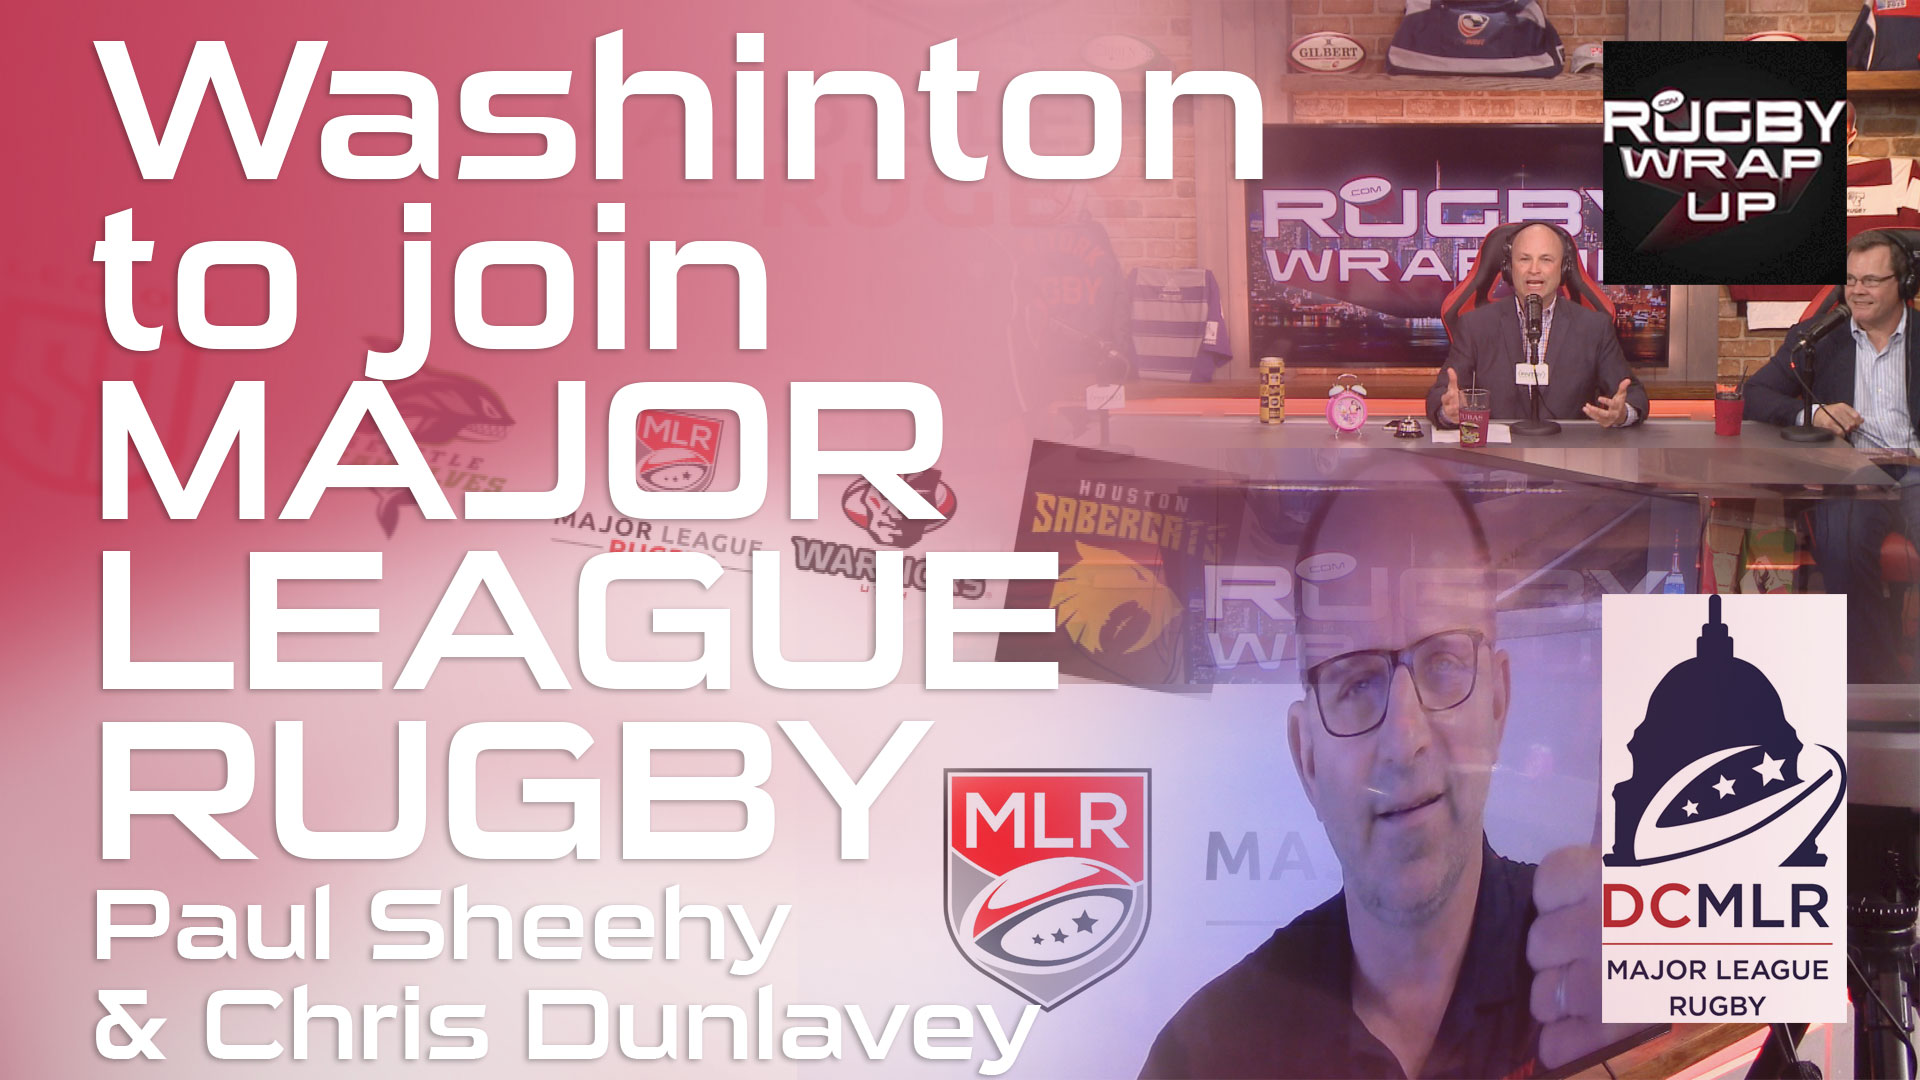 Washinton-DC-Major-League-Rugby, Rugby_Wrap_up